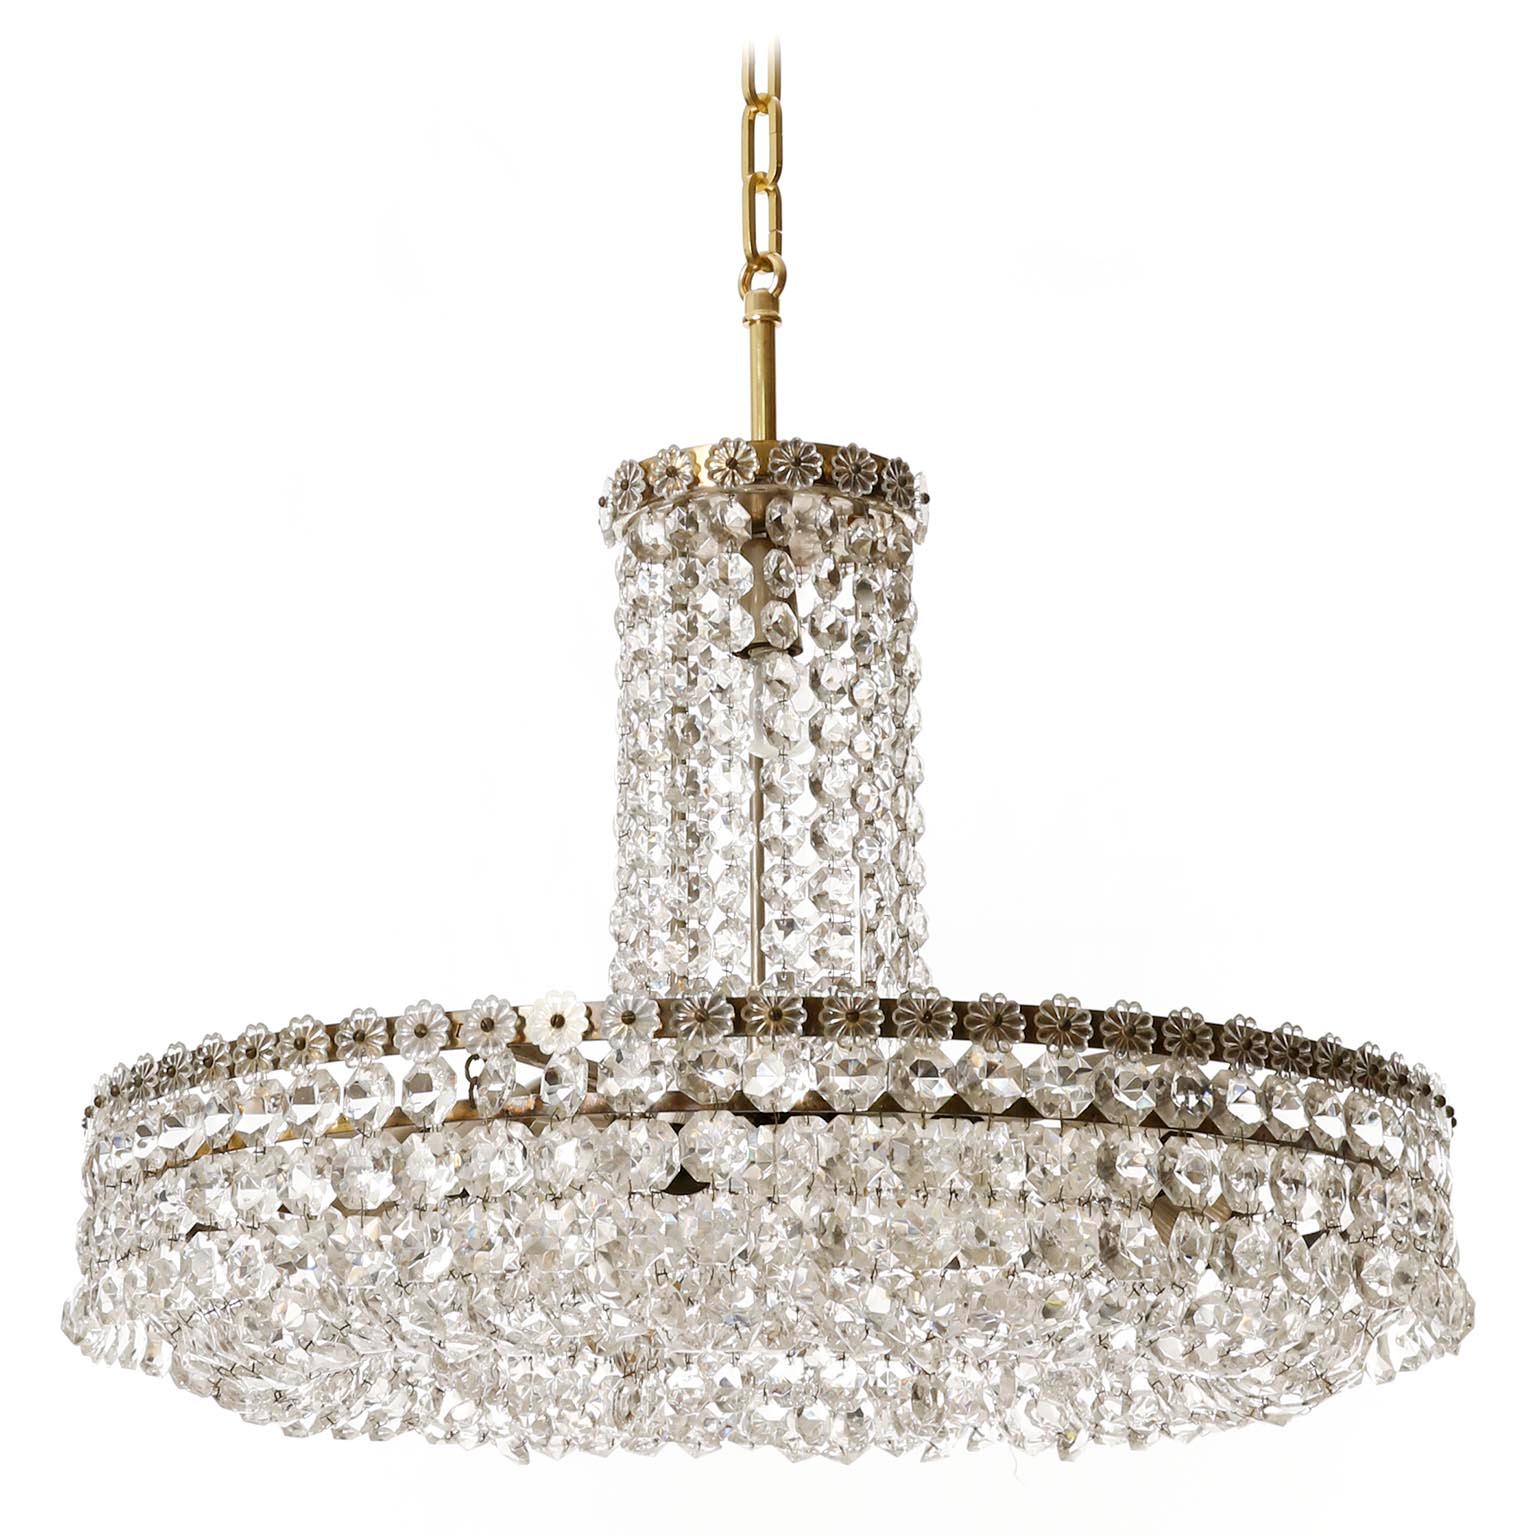 Crystal 1 of 3 Bakalowits Chandeliers Pendant Lights No. 3330, Brass Nickel Glass, 1960s For Sale